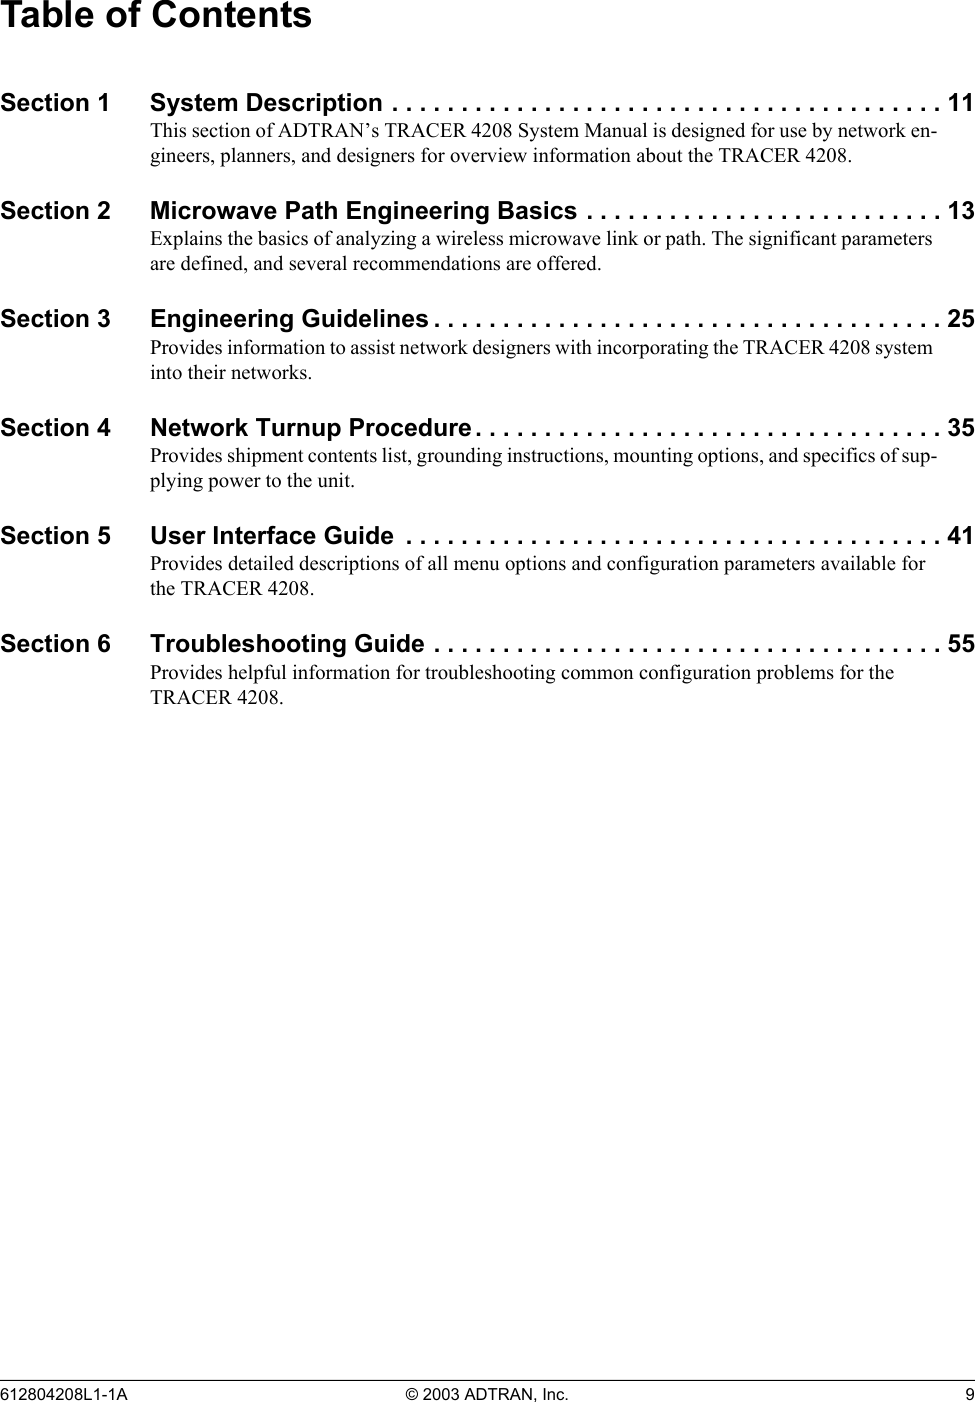 Table of Contents Section 1  System Description . . . . . . . . . . . . . . . . . . . . . . . . . . . . . . . . . . . . . . . . 11 This section of ADTRAN’s TRACER 4208 System Manual is designed for use by network en-gineers, planners, and designers for overview information about the TRACER 4208. Section 2  Microwave Path Engineering Basics . . . . . . . . . . . . . . . . . . . . . . . . . . 13 Explains the basics of analyzing a wireless microwave link or path. The significant parameters are defined, and several recommendations are offered. Section 3  Engineering Guidelines . . . . . . . . . . . . . . . . . . . . . . . . . . . . . . . . . . . . . 25 Provides information to assist network designers with incorporating the TRACER 4208 system into their networks. Section 4  Network Turnup Procedure . . . . . . . . . . . . . . . . . . . . . . . . . . . . . . . . . . 35 Provides shipment contents list, grounding instructions, mounting options, and specifics of sup-plying power to the unit. Section 5  User Interface Guide  . . . . . . . . . . . . . . . . . . . . . . . . . . . . . . . . . . . . . . . 41 Provides detailed descriptions of all menu options and configuration parameters available for the TRACER 4208. Section 6  Troubleshooting Guide . . . . . . . . . . . . . . . . . . . . . . . . . . . . . . . . . . . . . 55 Provides helpful information for troubleshooting common configuration problems for the TRACER 4208. 612804208L1-1A  © 2003 ADTRAN, Inc.  9 